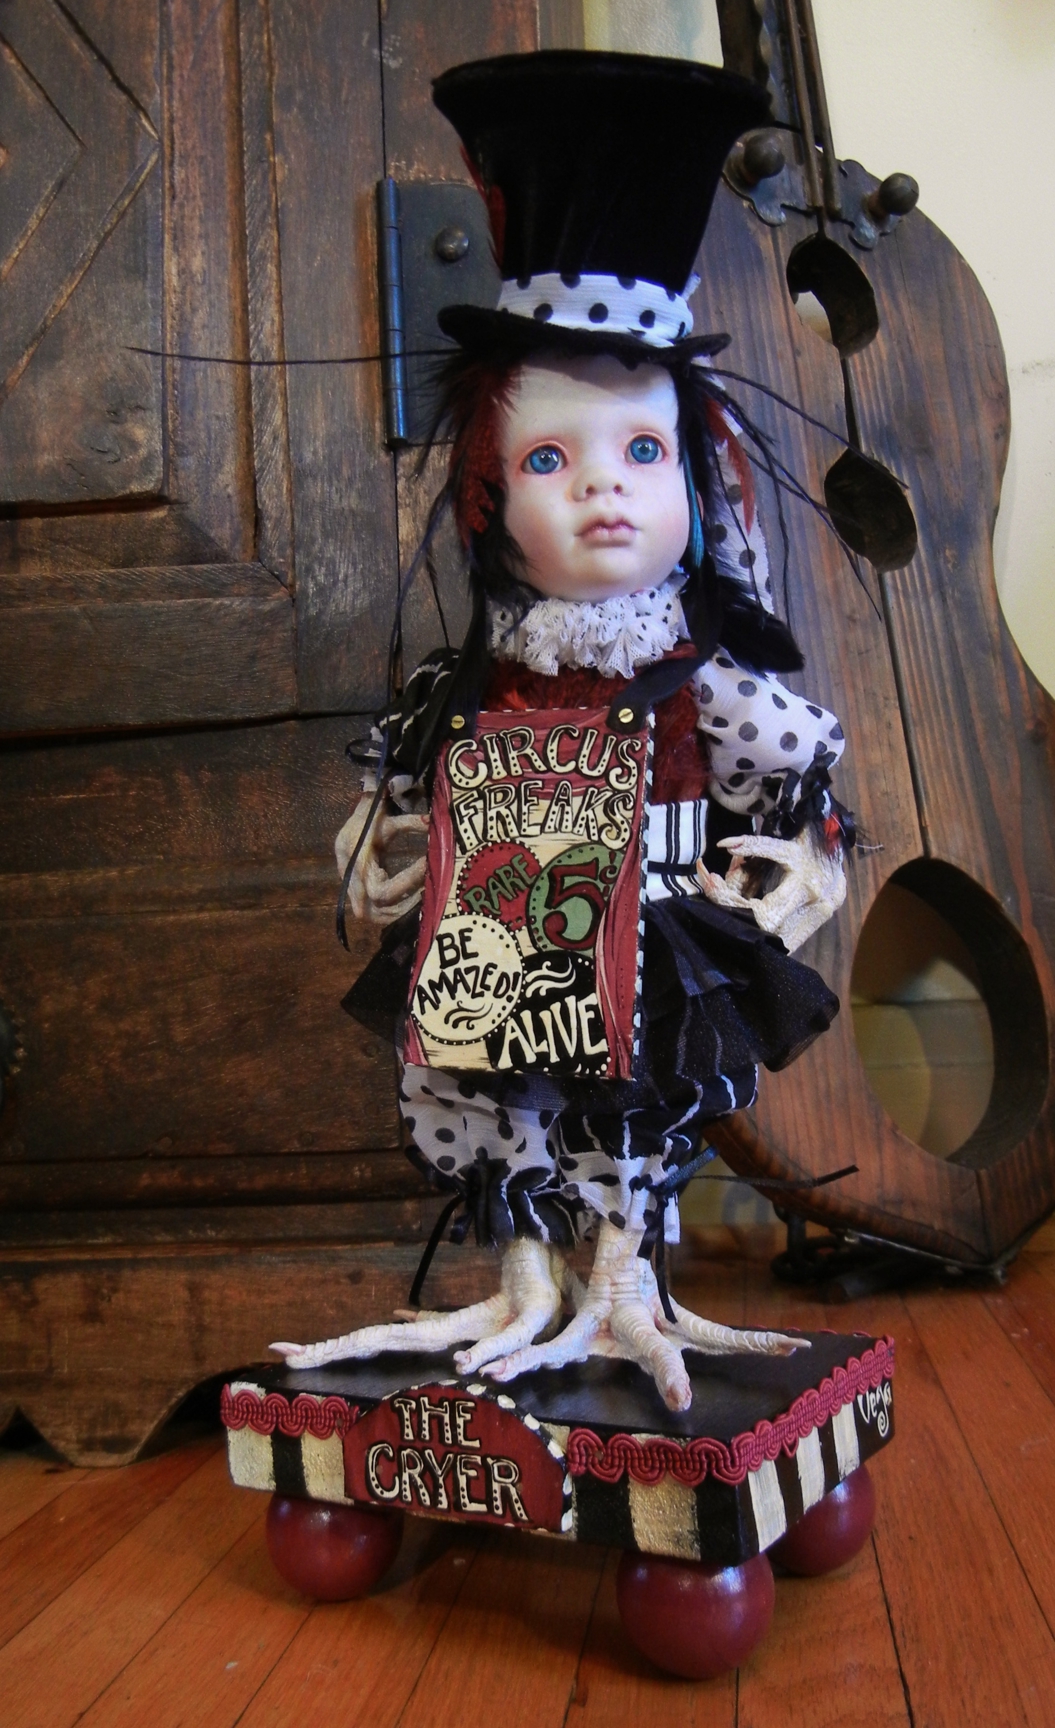 gothic feathered mixed media artdoll with taxidermy birdfeet. Sideshow-themed circus cryer wearing hand-painted wooden signboard, black velvet tophat, black and white doll clothes, stands on a hand-painted wooden platform